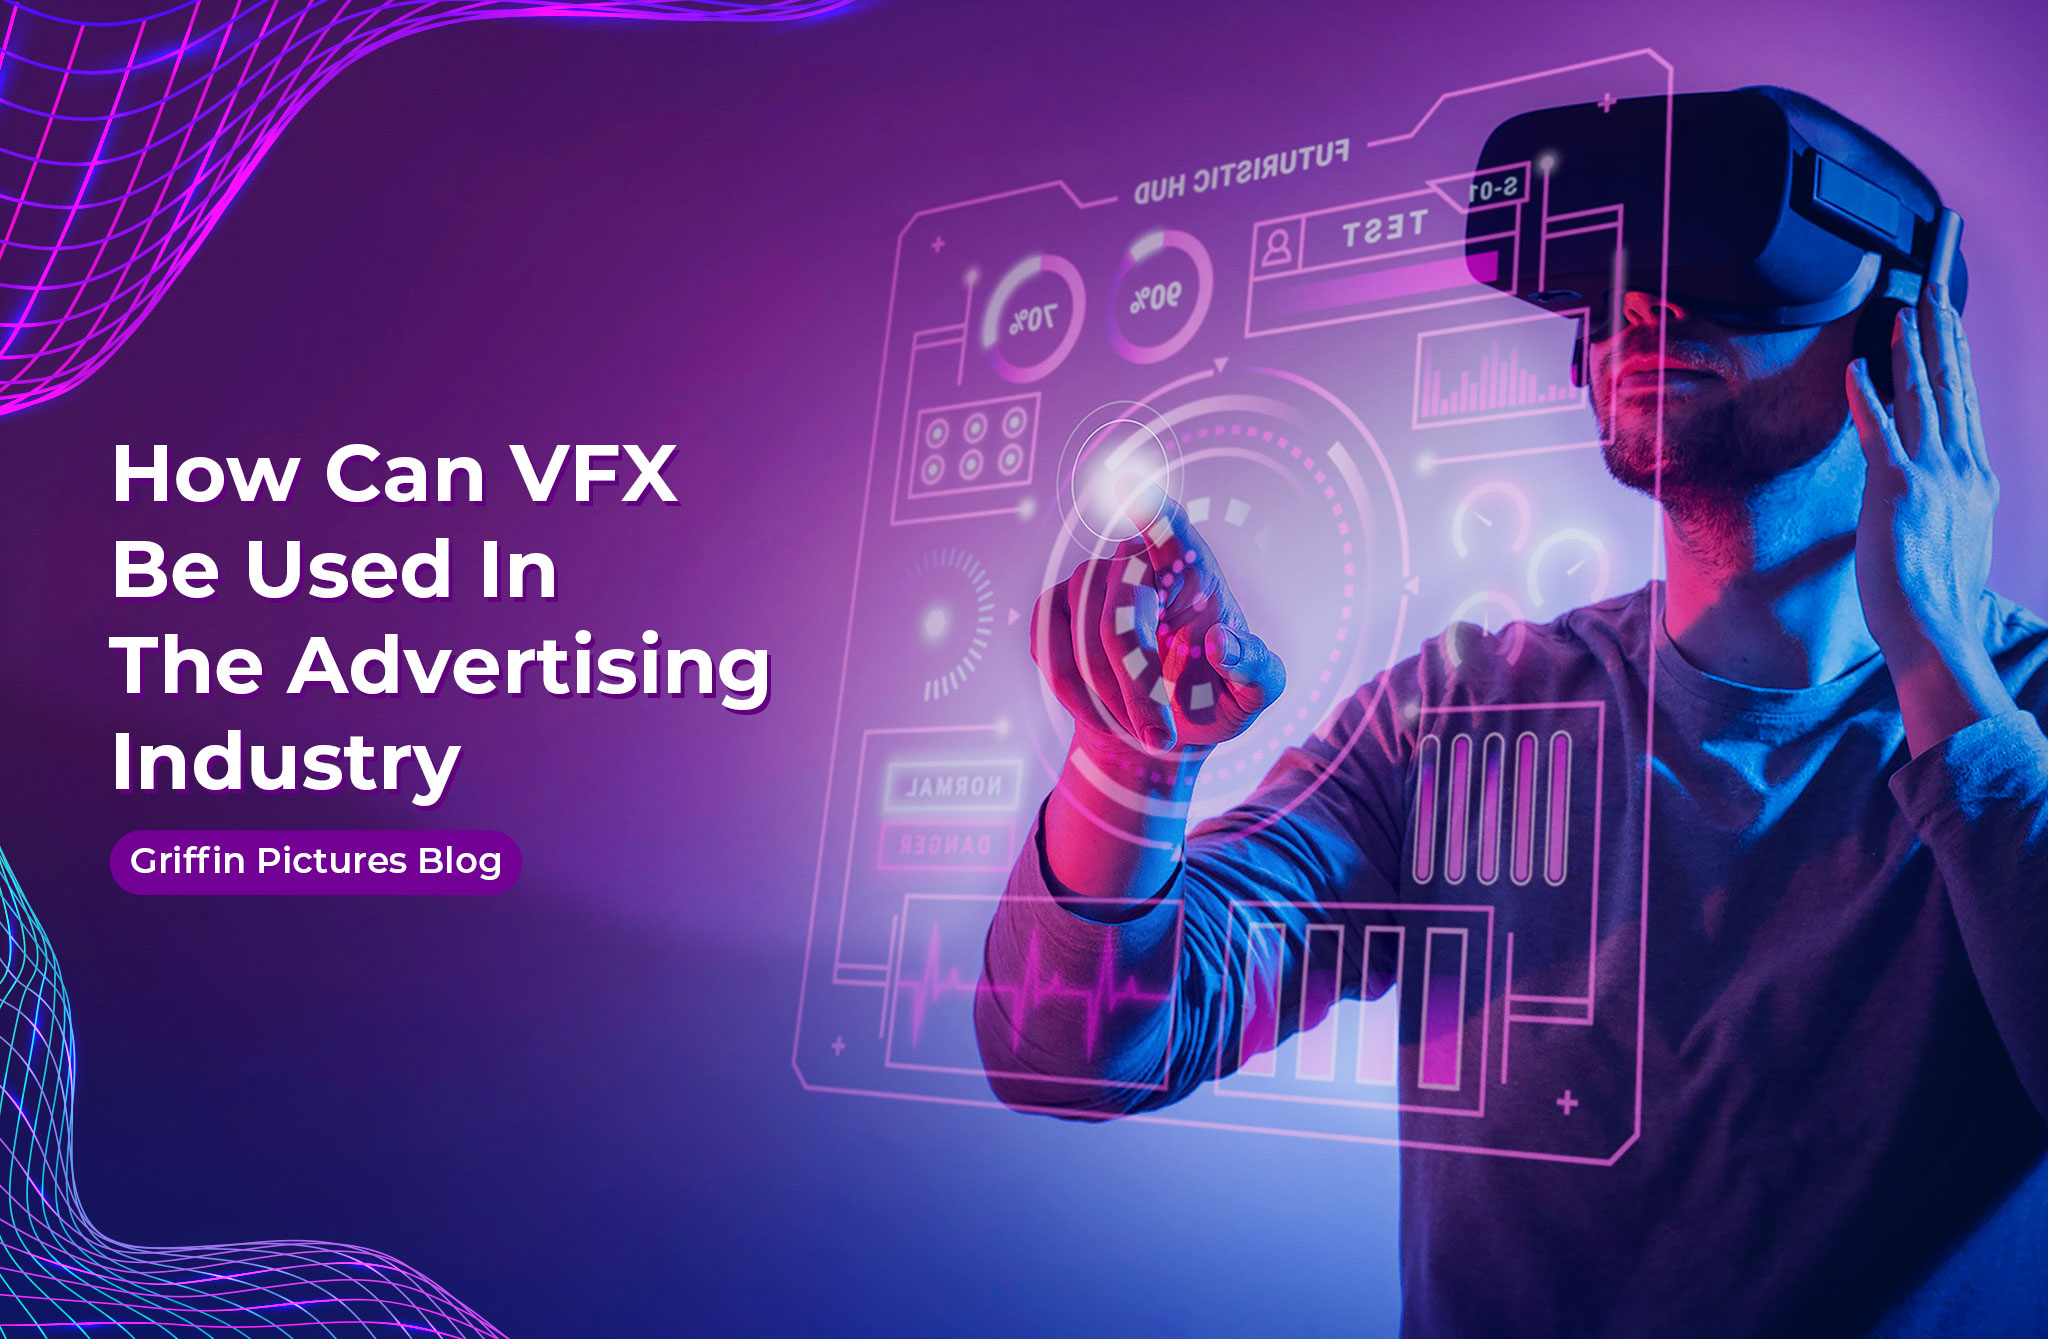 Importance Of Using VFX In The Advertising Industry